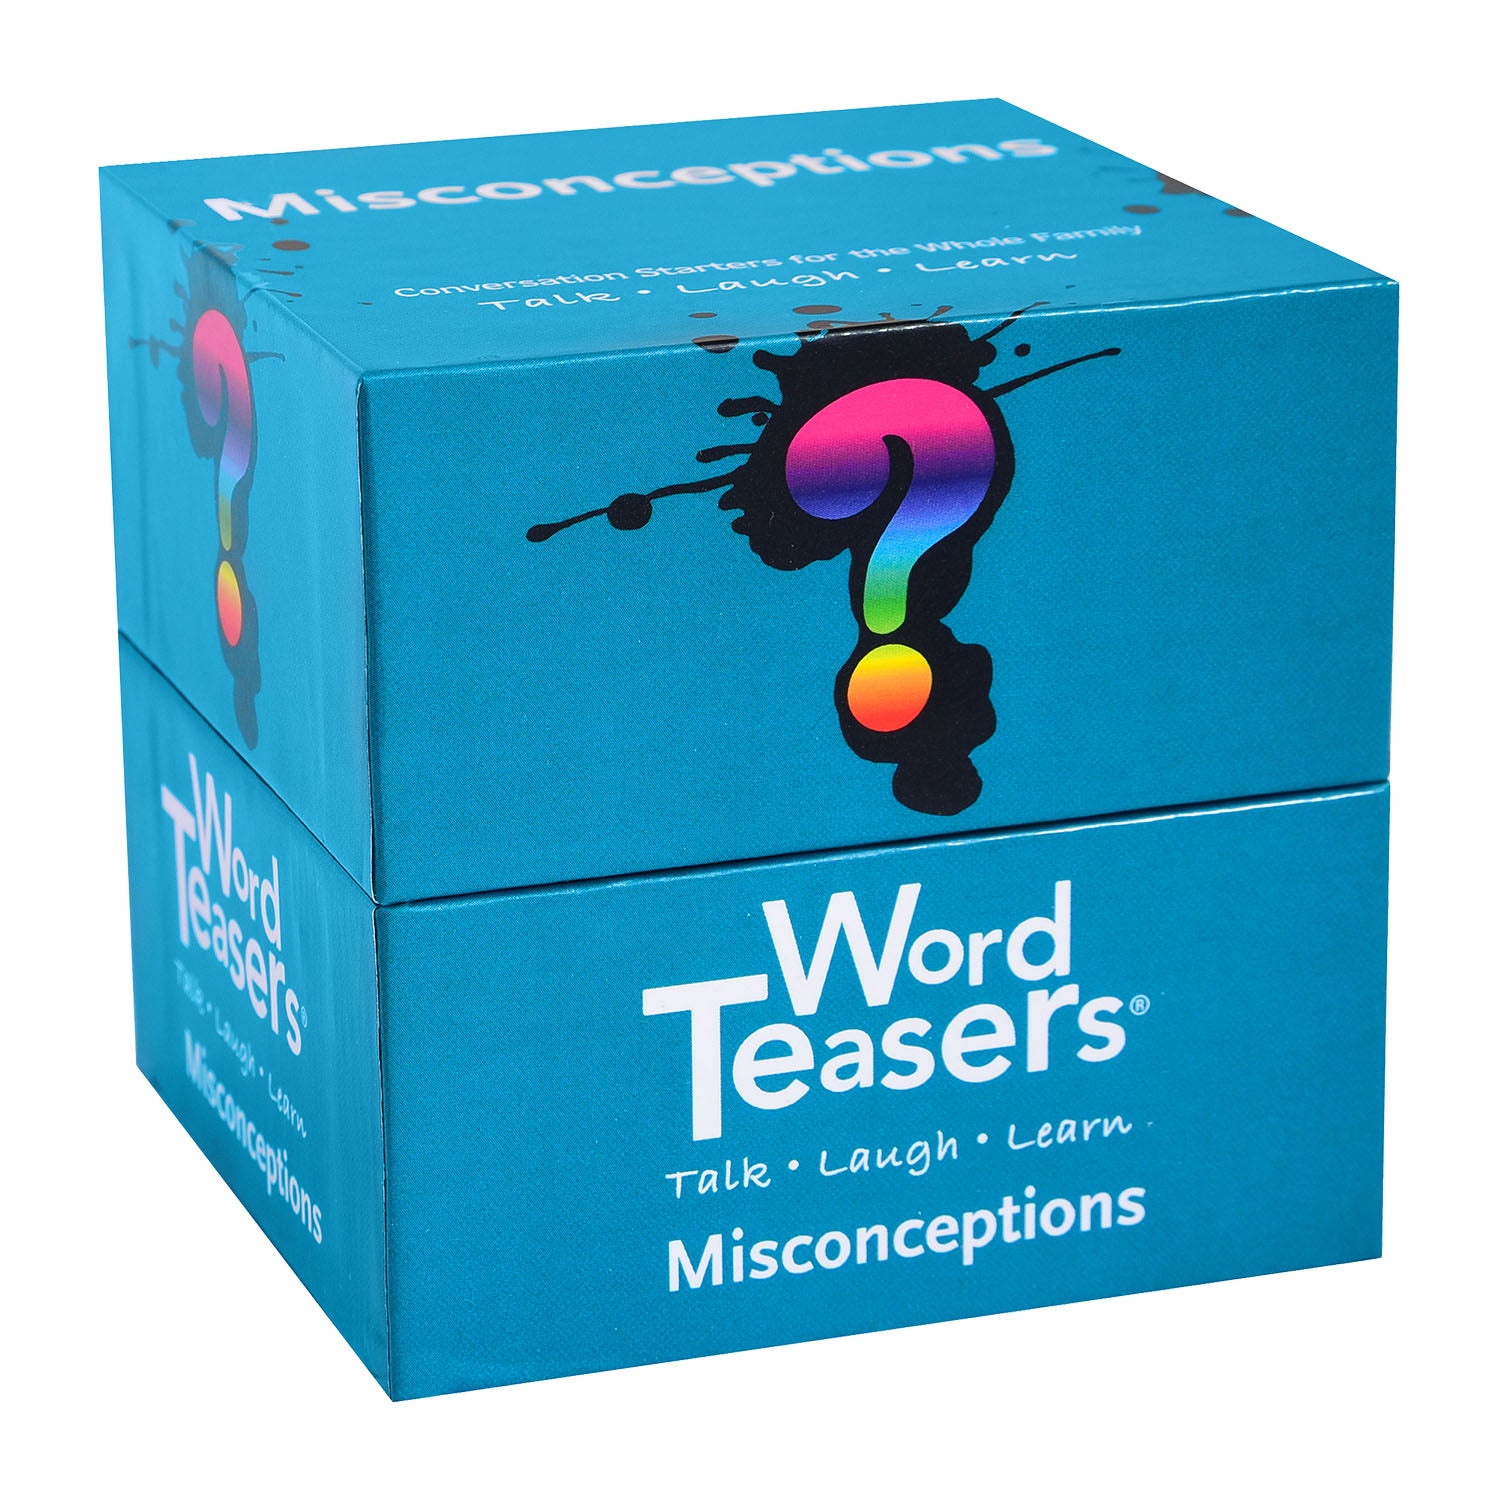 Word Teasers Misconceptions